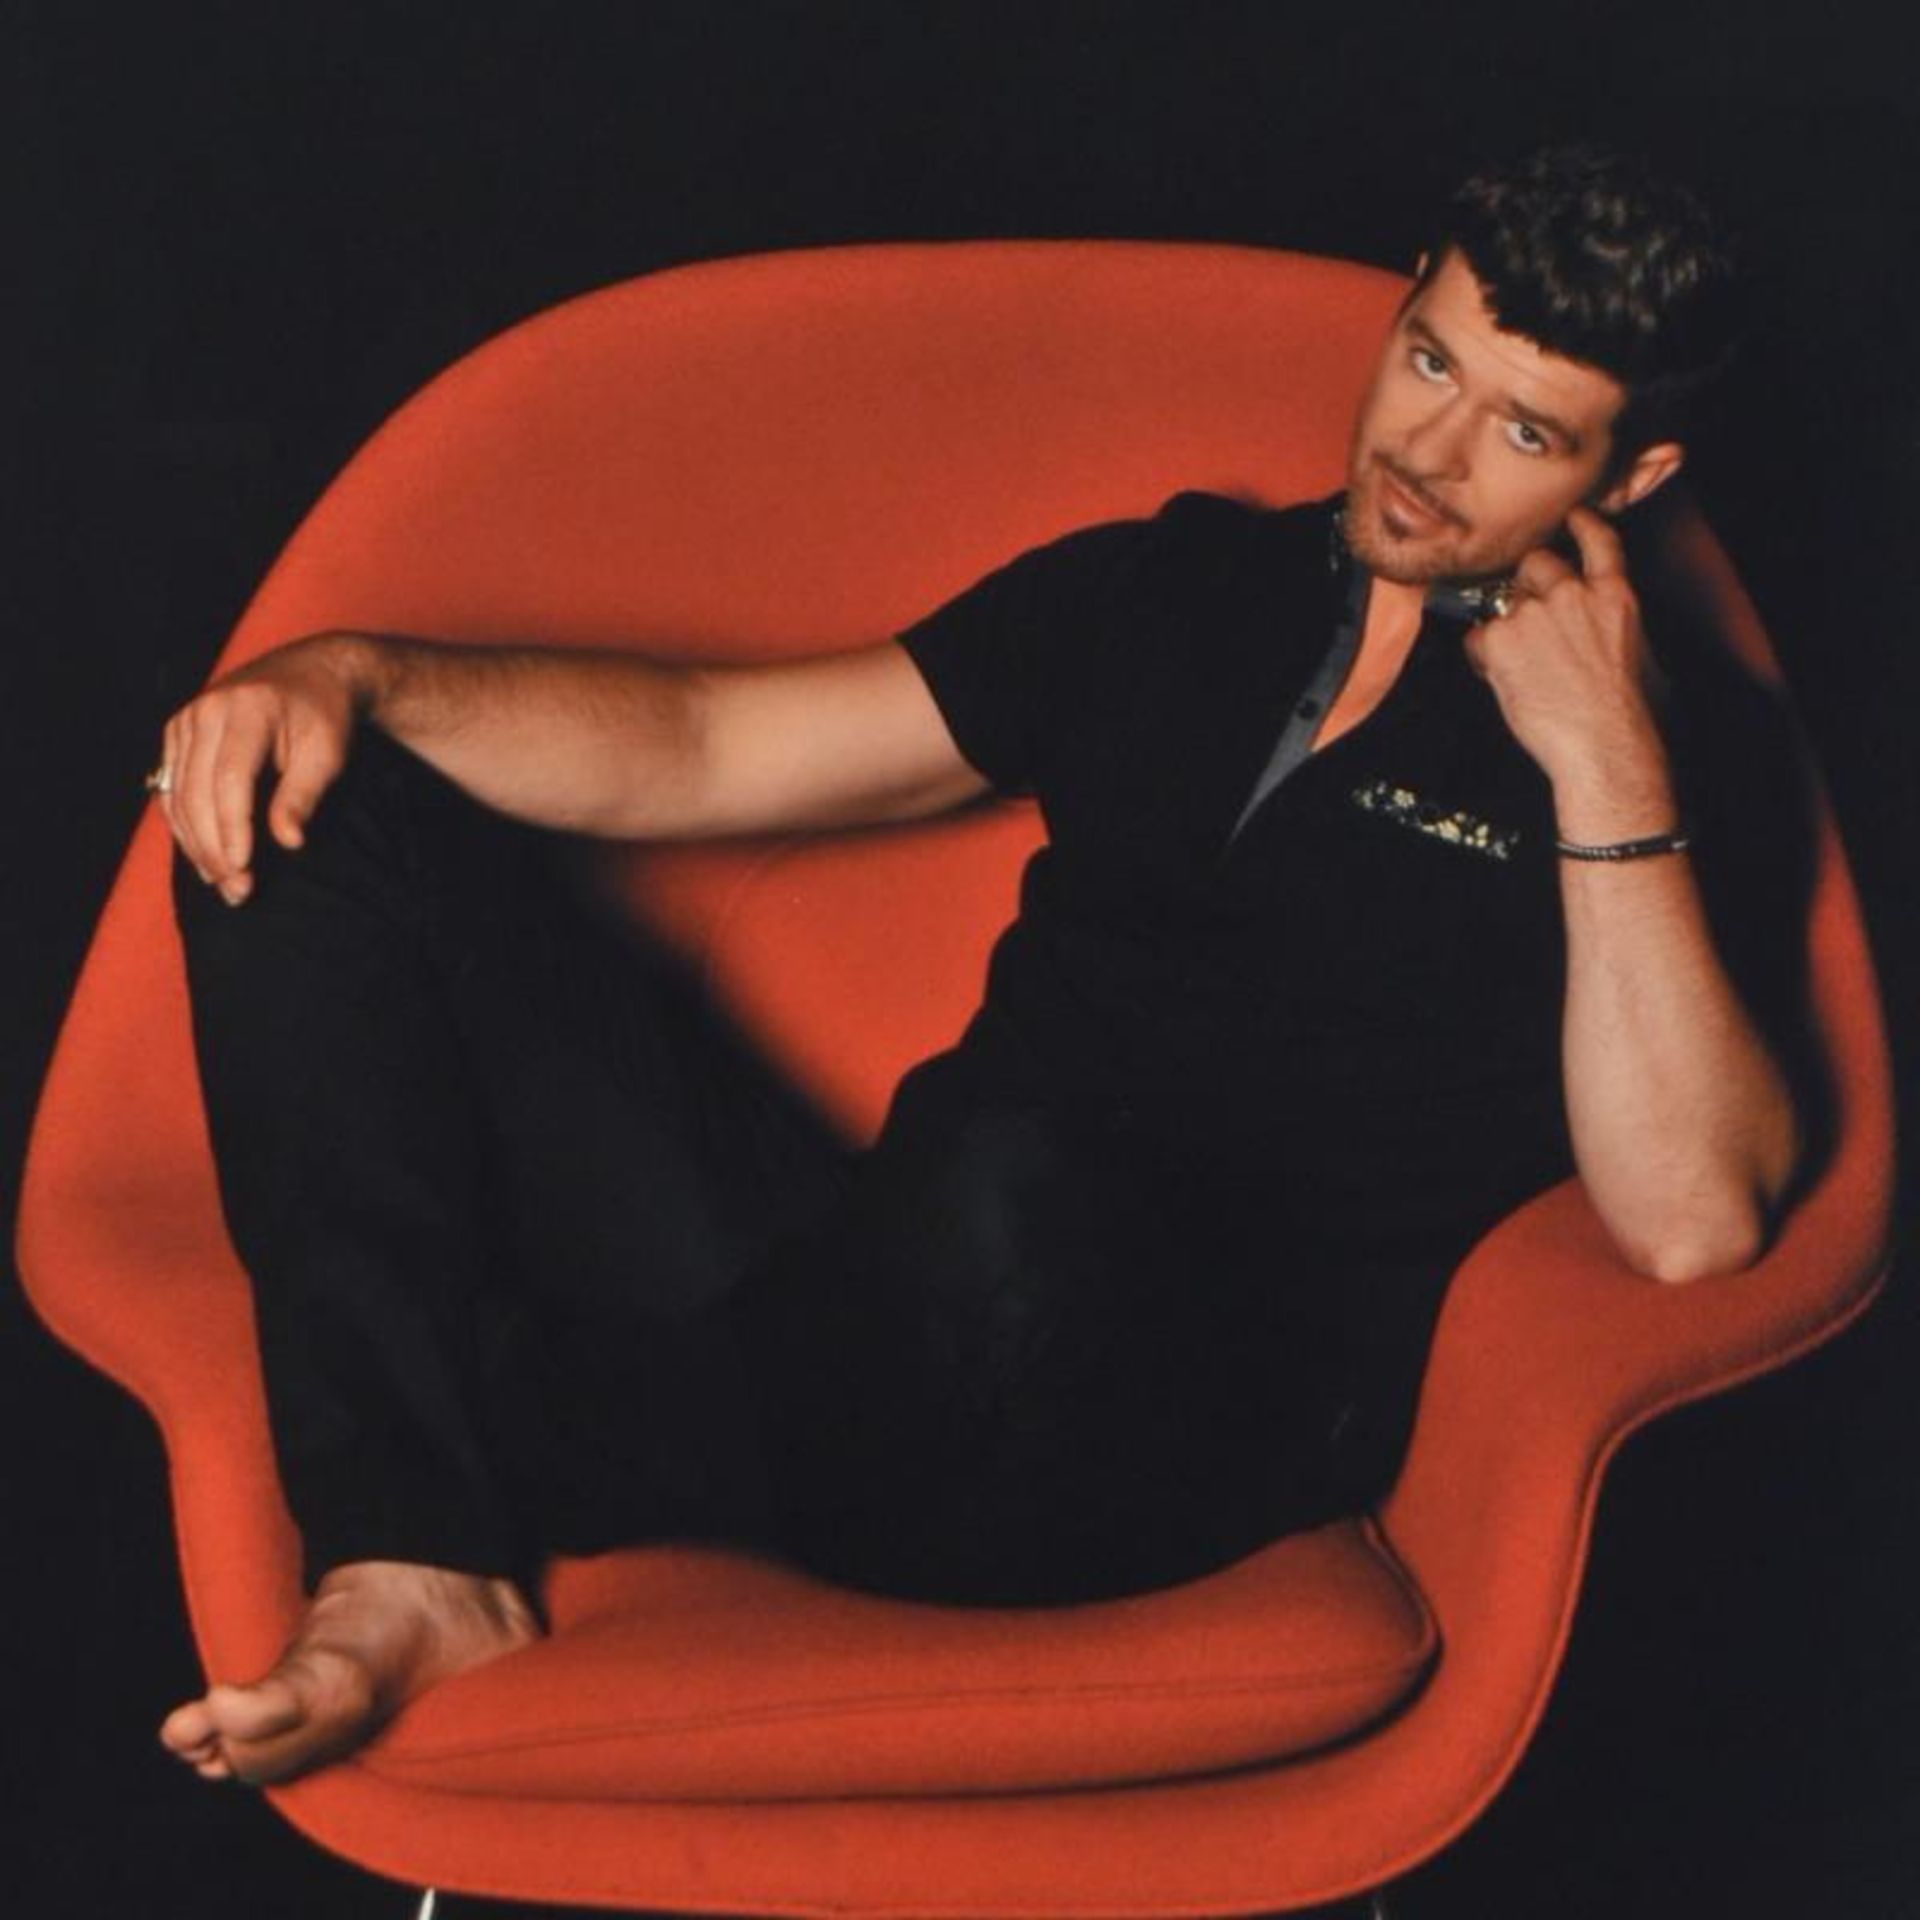 Robin Thicke by Shanahan, Rob - Image 2 of 2